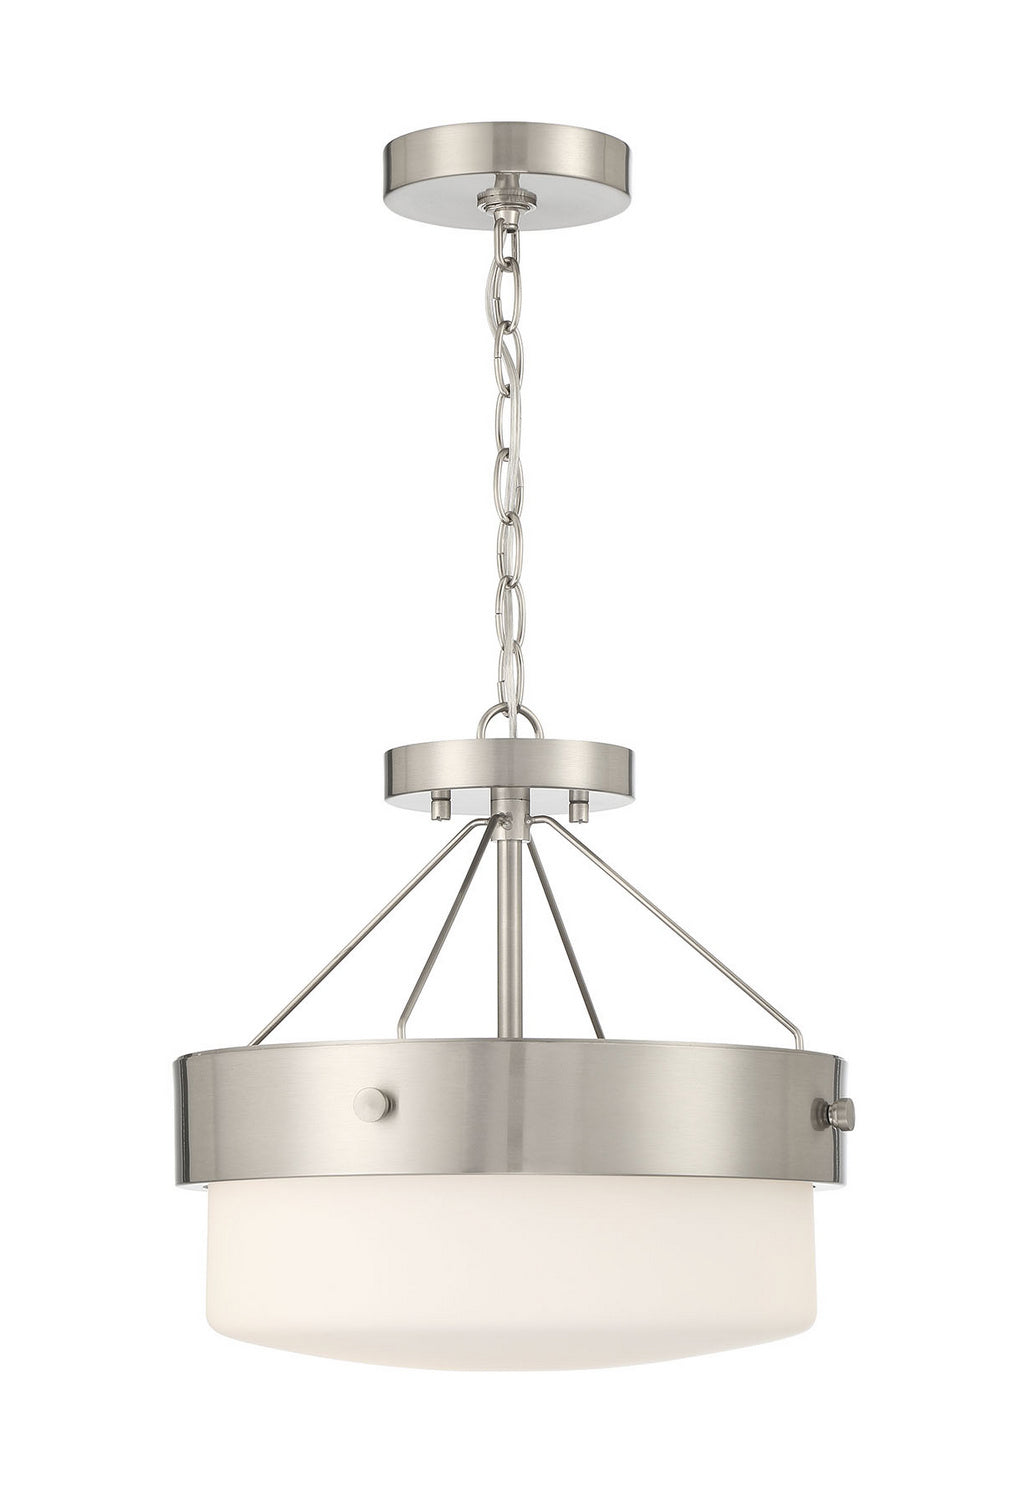 Craftmade Two Light Flushmount from the Oak Street collection in Brushed Polished Nickel/Whiskey Barrel finish